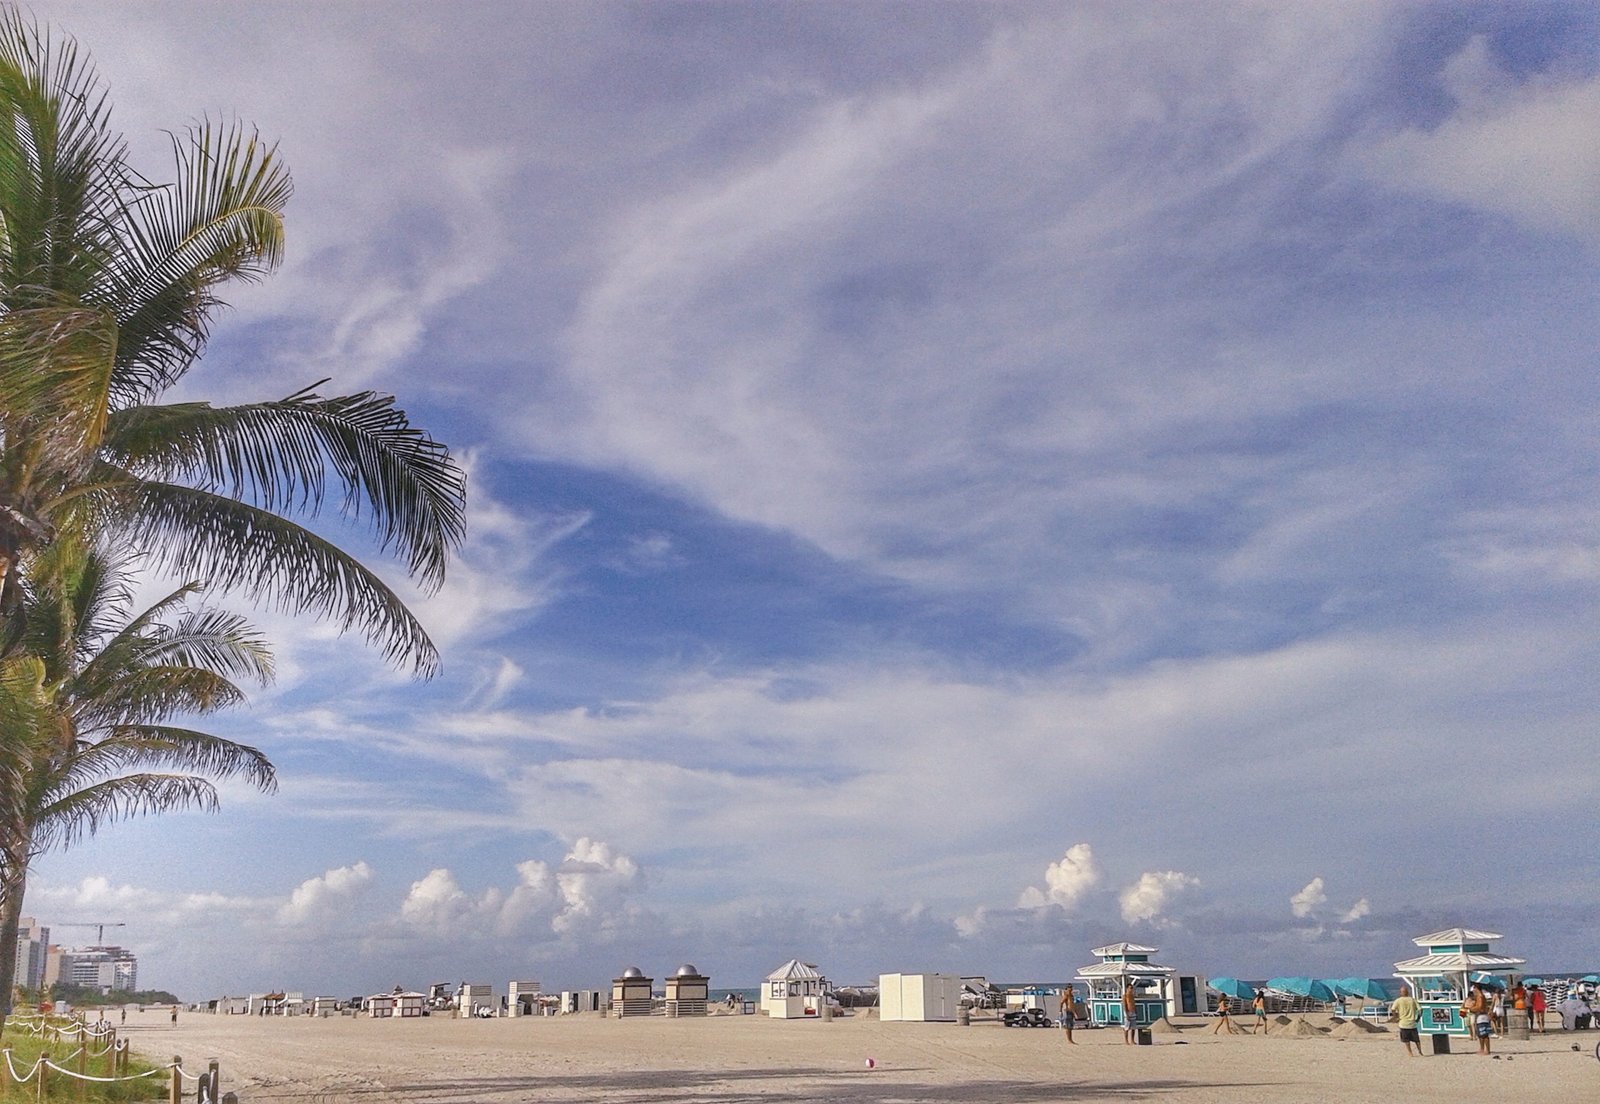 How to have fun in Miami Beach on a budget